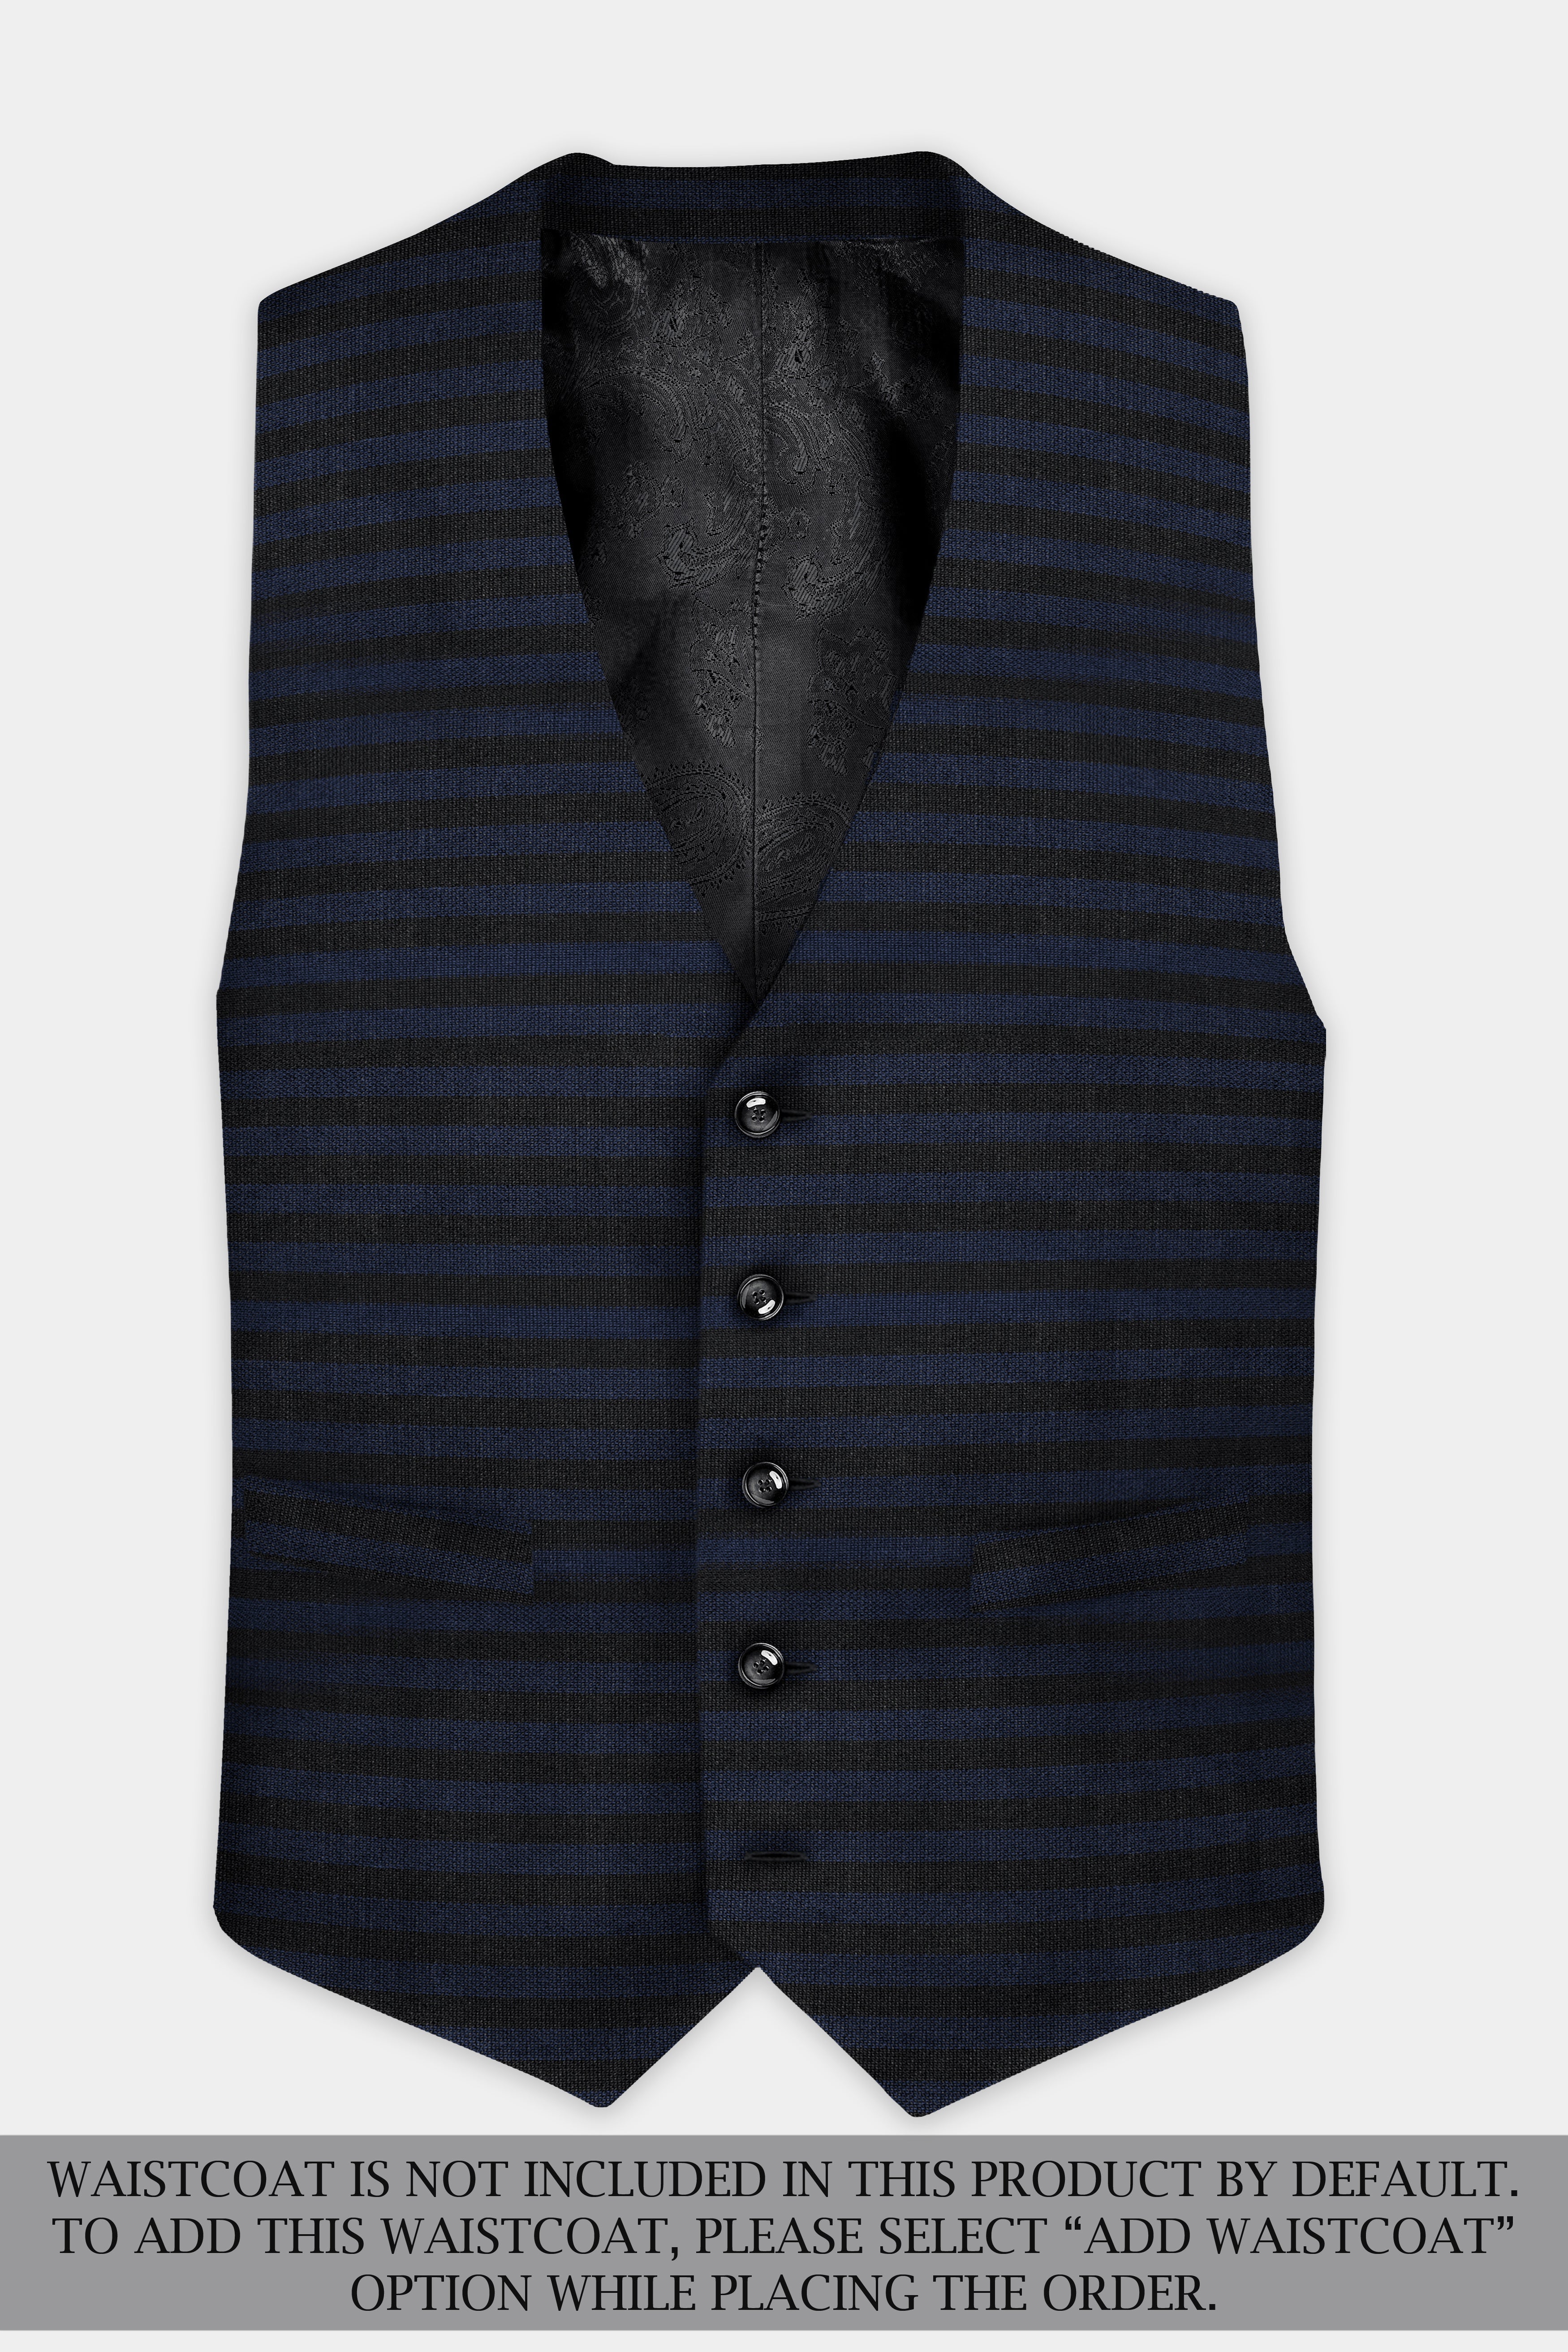 Mirage Blue and Black Horizontal Striped Wool Blend Suit